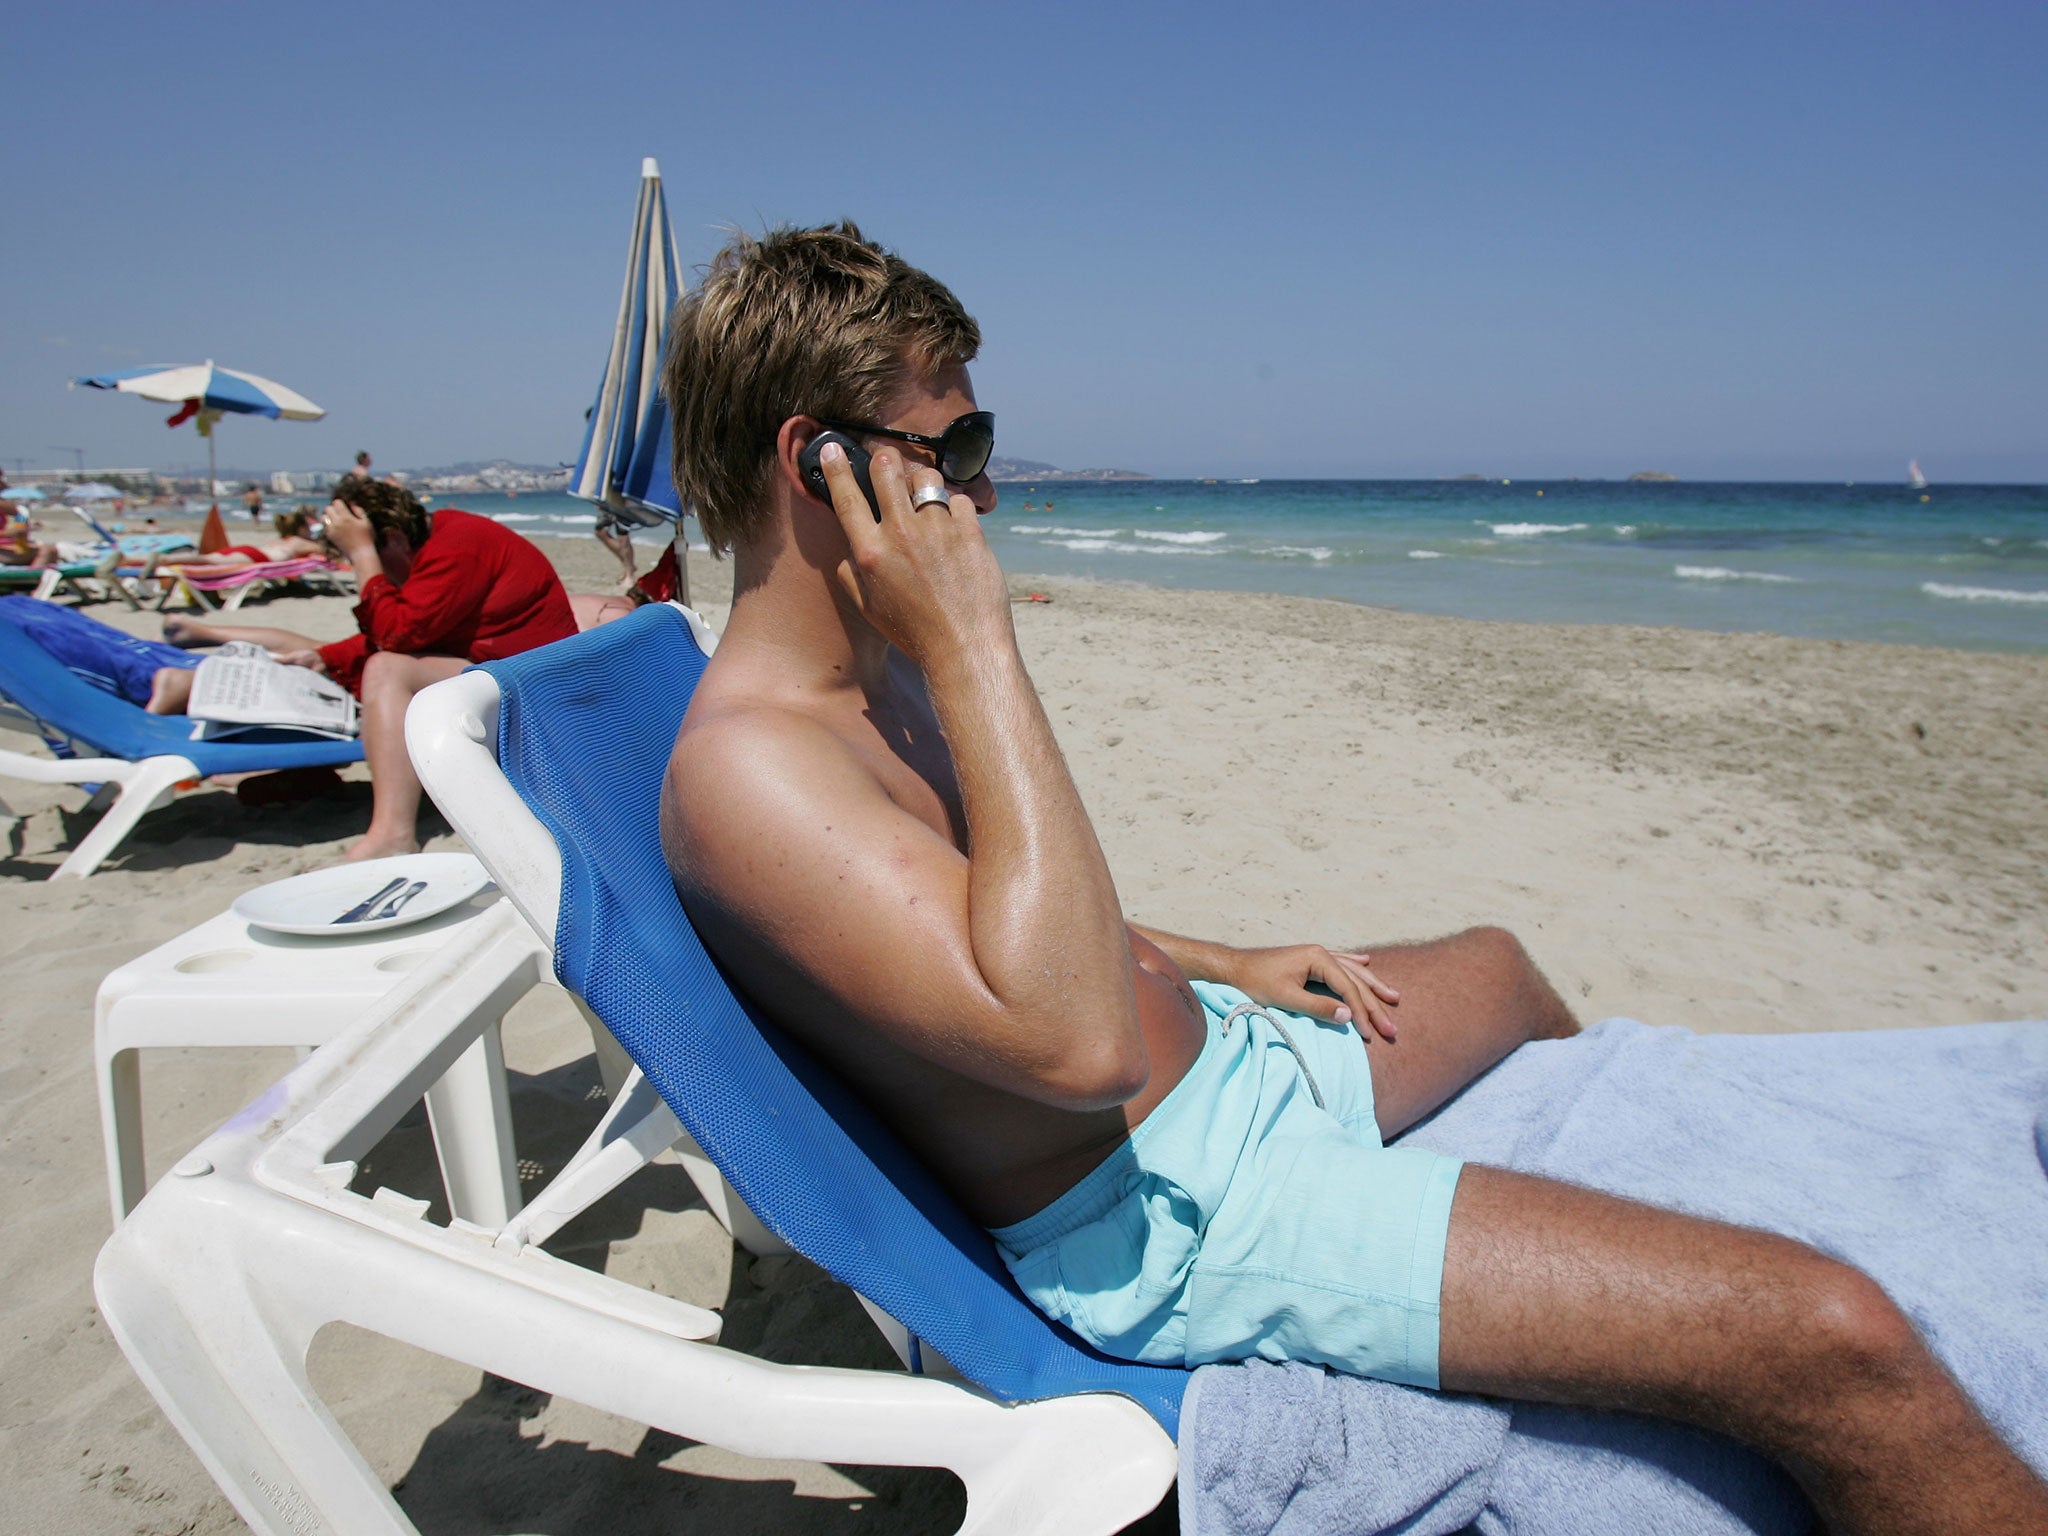 People are now more likely to blend work into their holidays